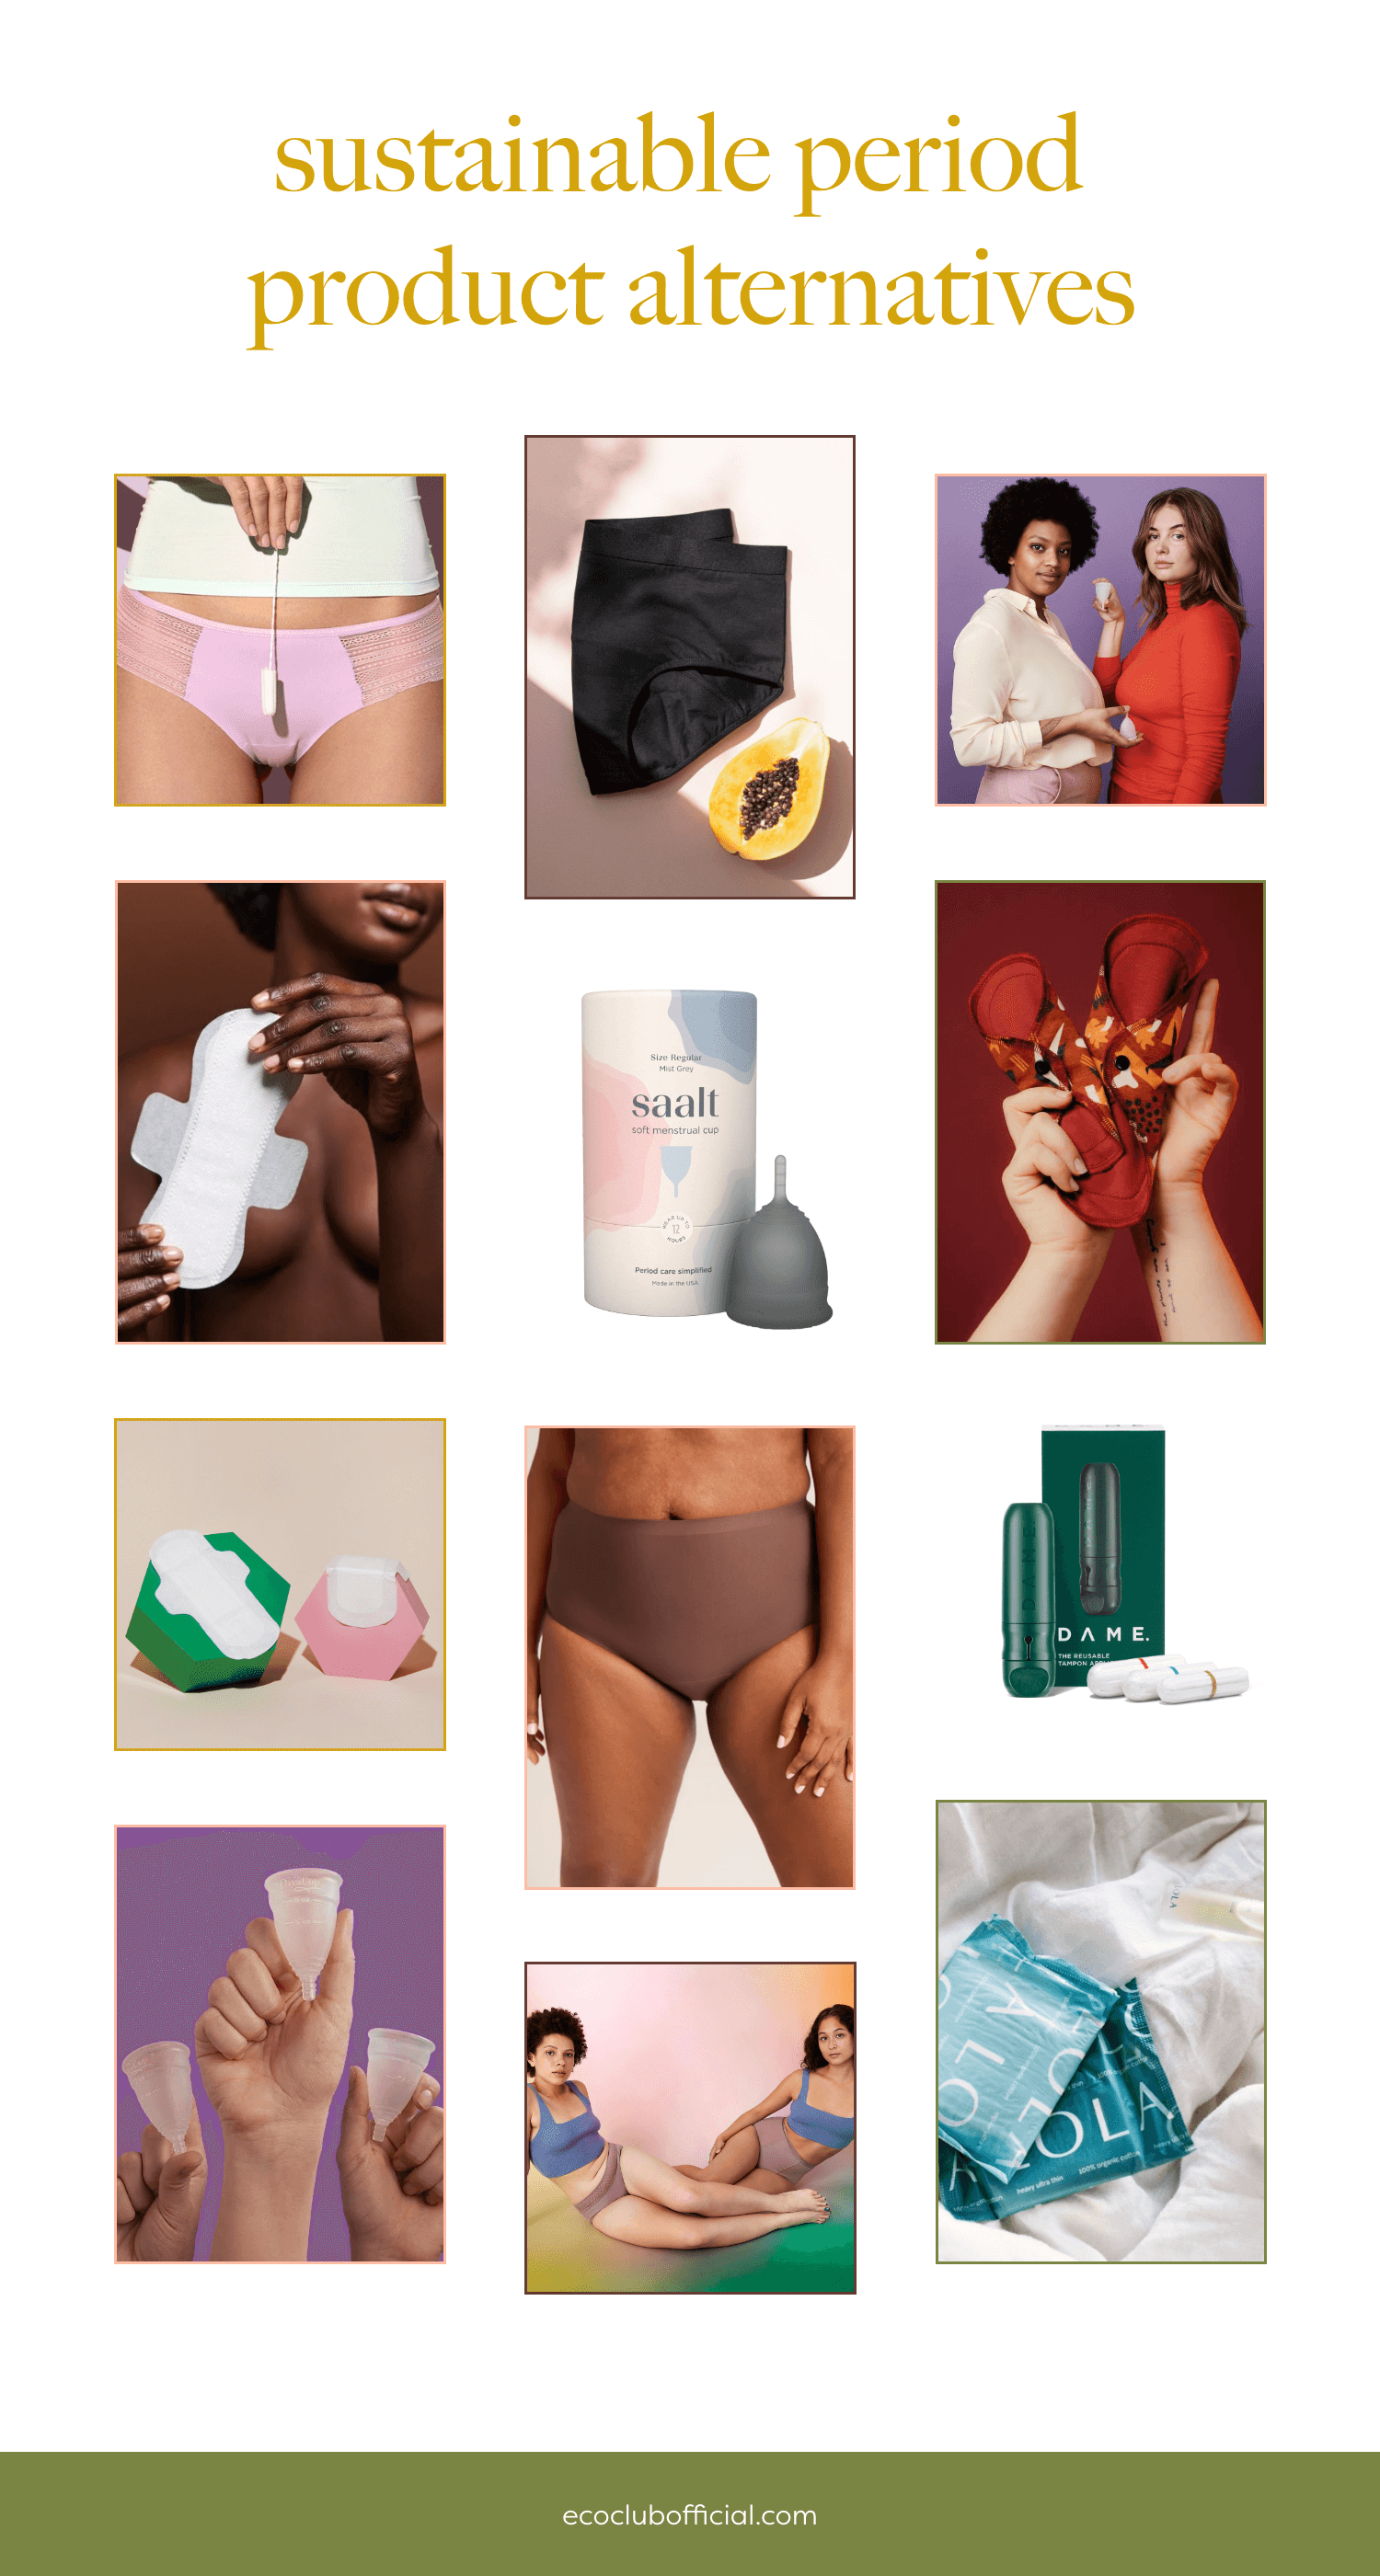 How to Switch to Reusable Period Undies and Menstrual Cups plus Reviews on  each e.g ModiBodi, Bonds, Love Luna, Toms etc. - The Thrifty Issue